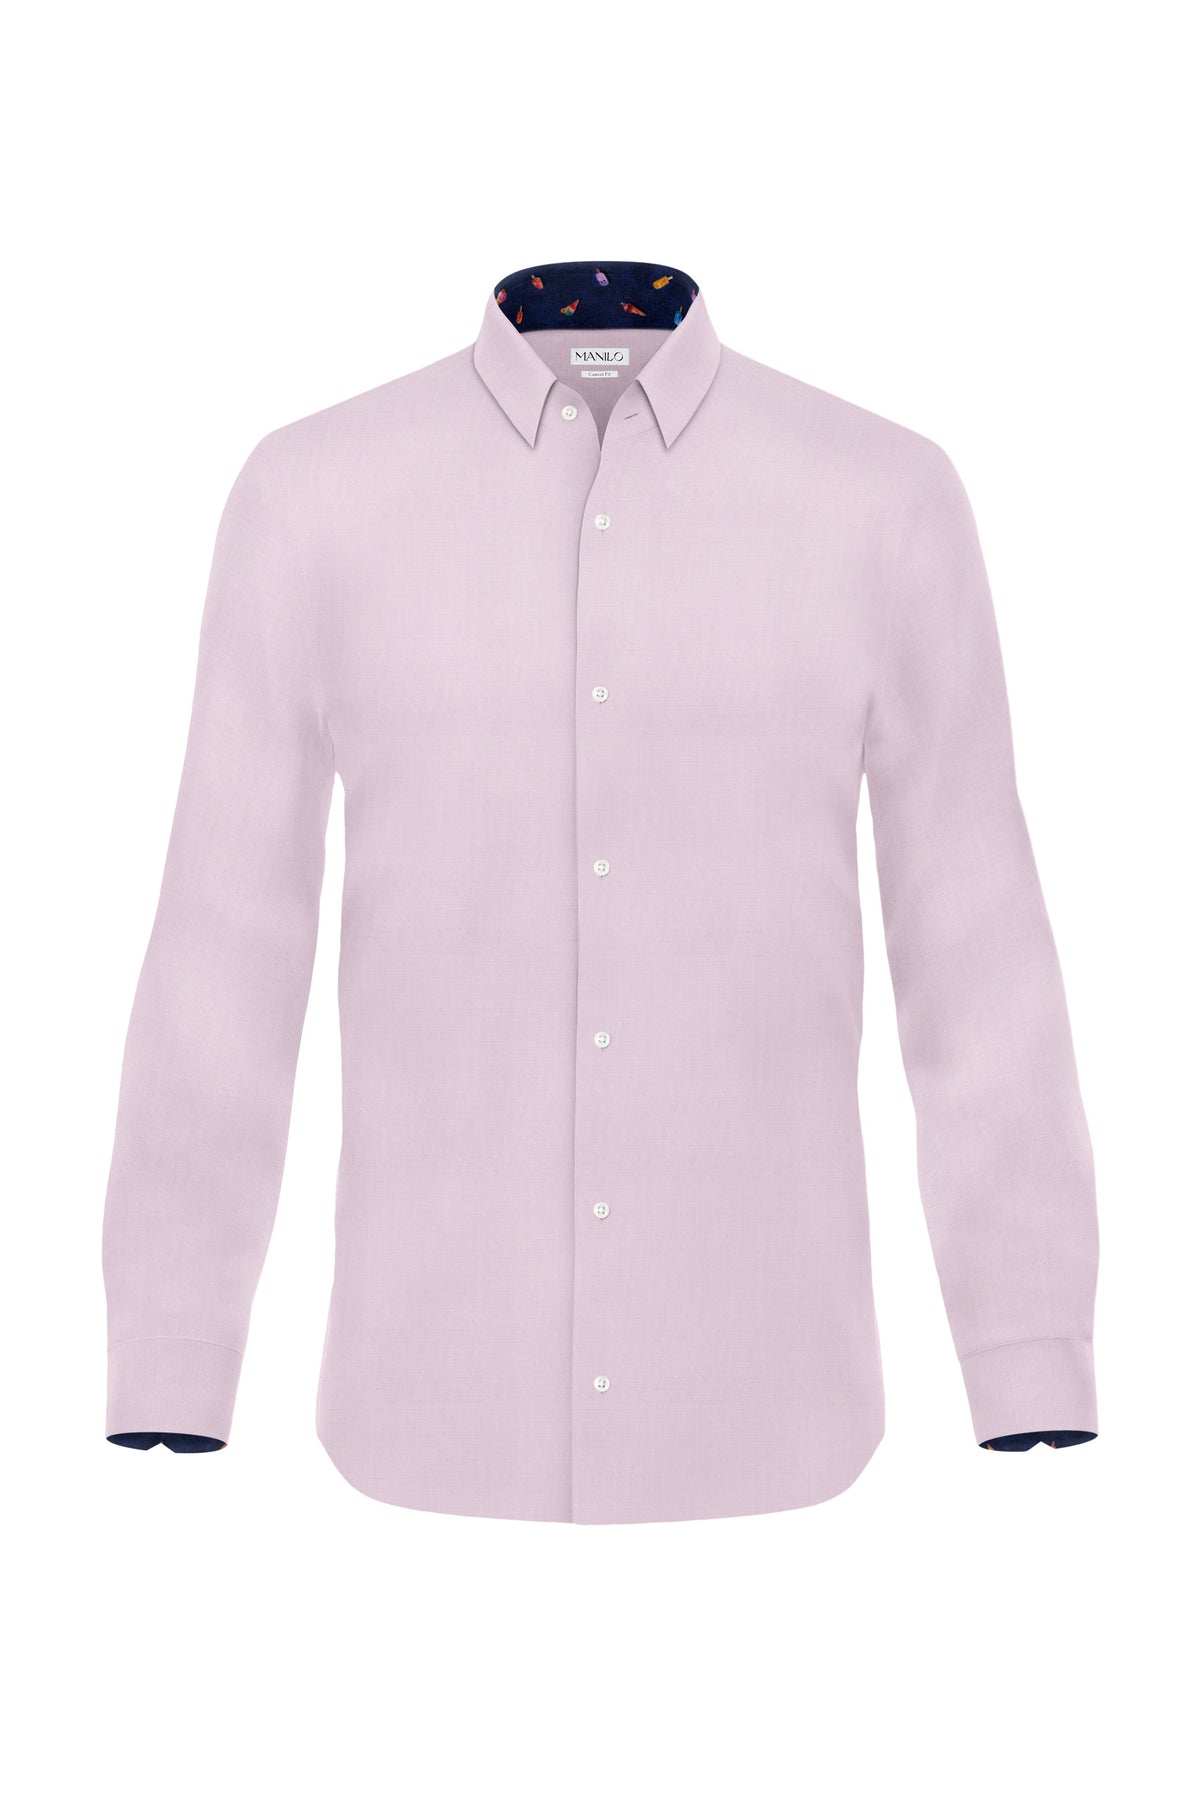 Casual shirt with summery print pattern in collar and cuff in pink (item 2254-C)